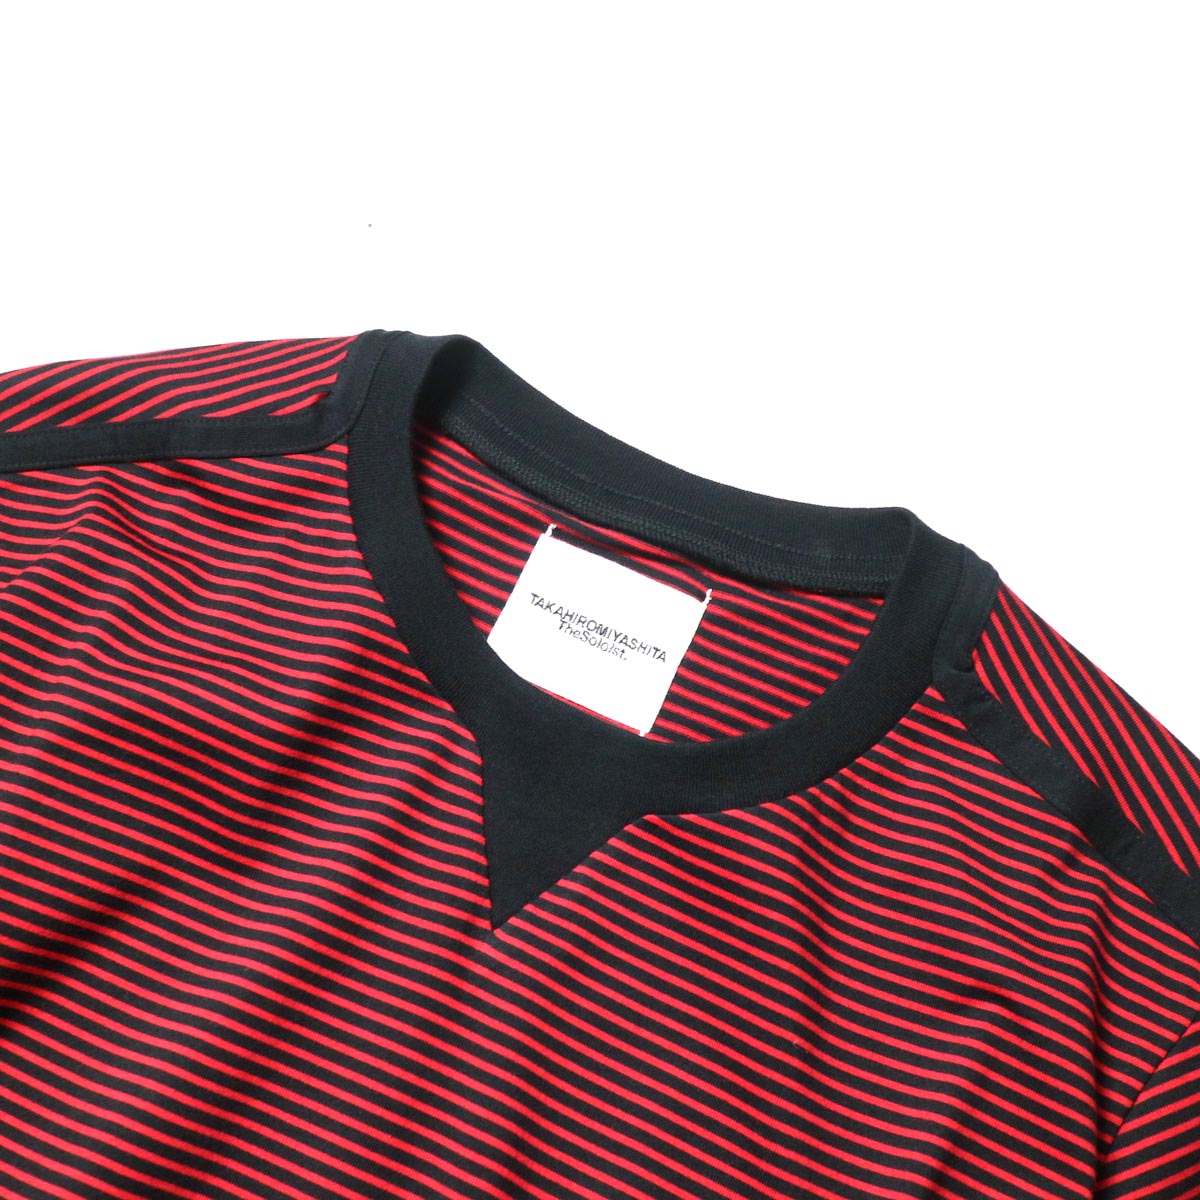 The Soloist / swc.0009a crew neck s/s striped tee. (Black × Red)ネック